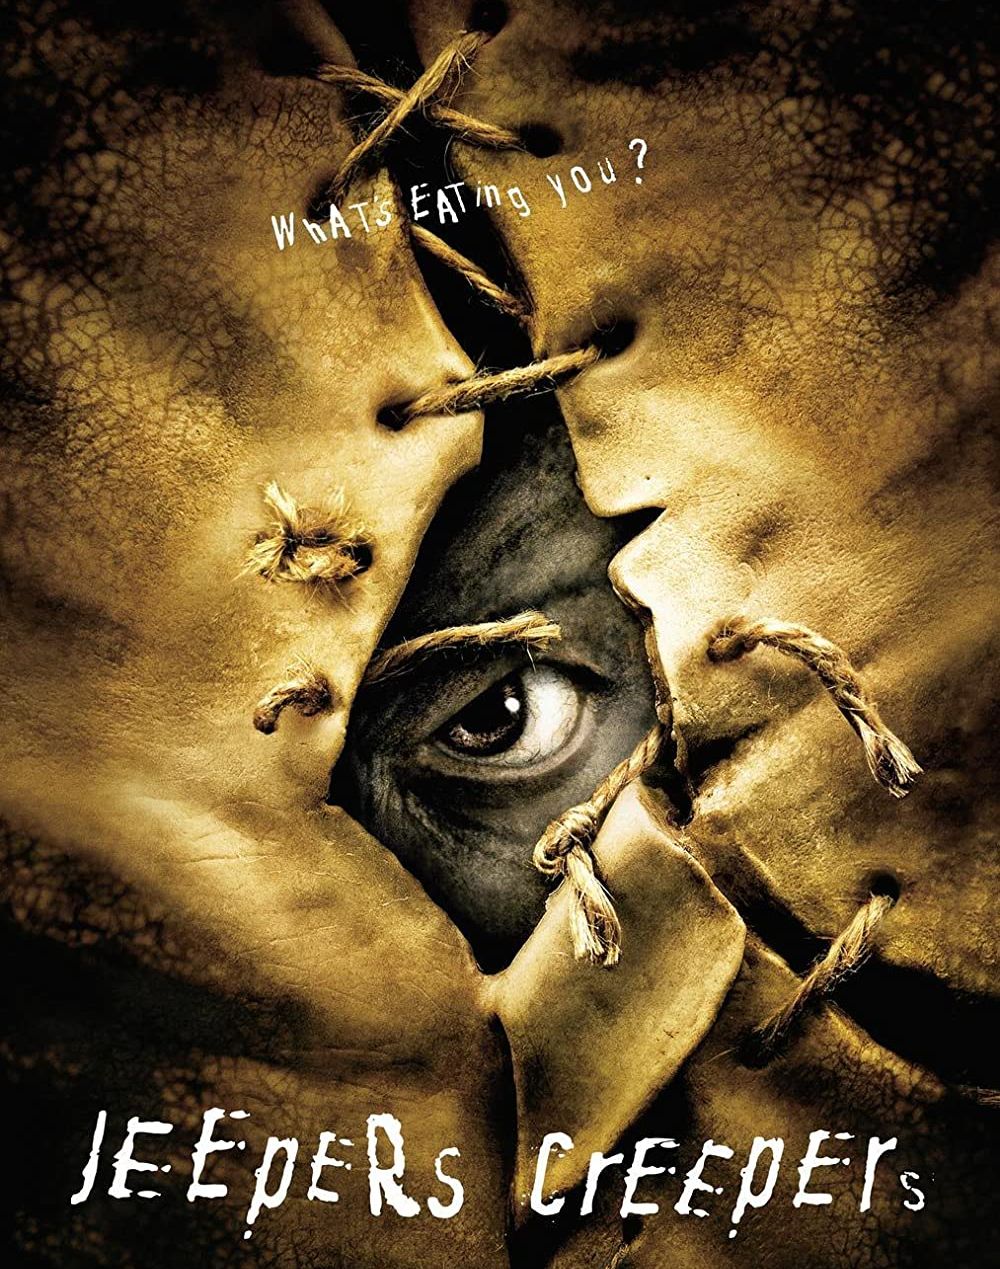 It's waiting. It's hungry - Jeepers Creepers (2001)